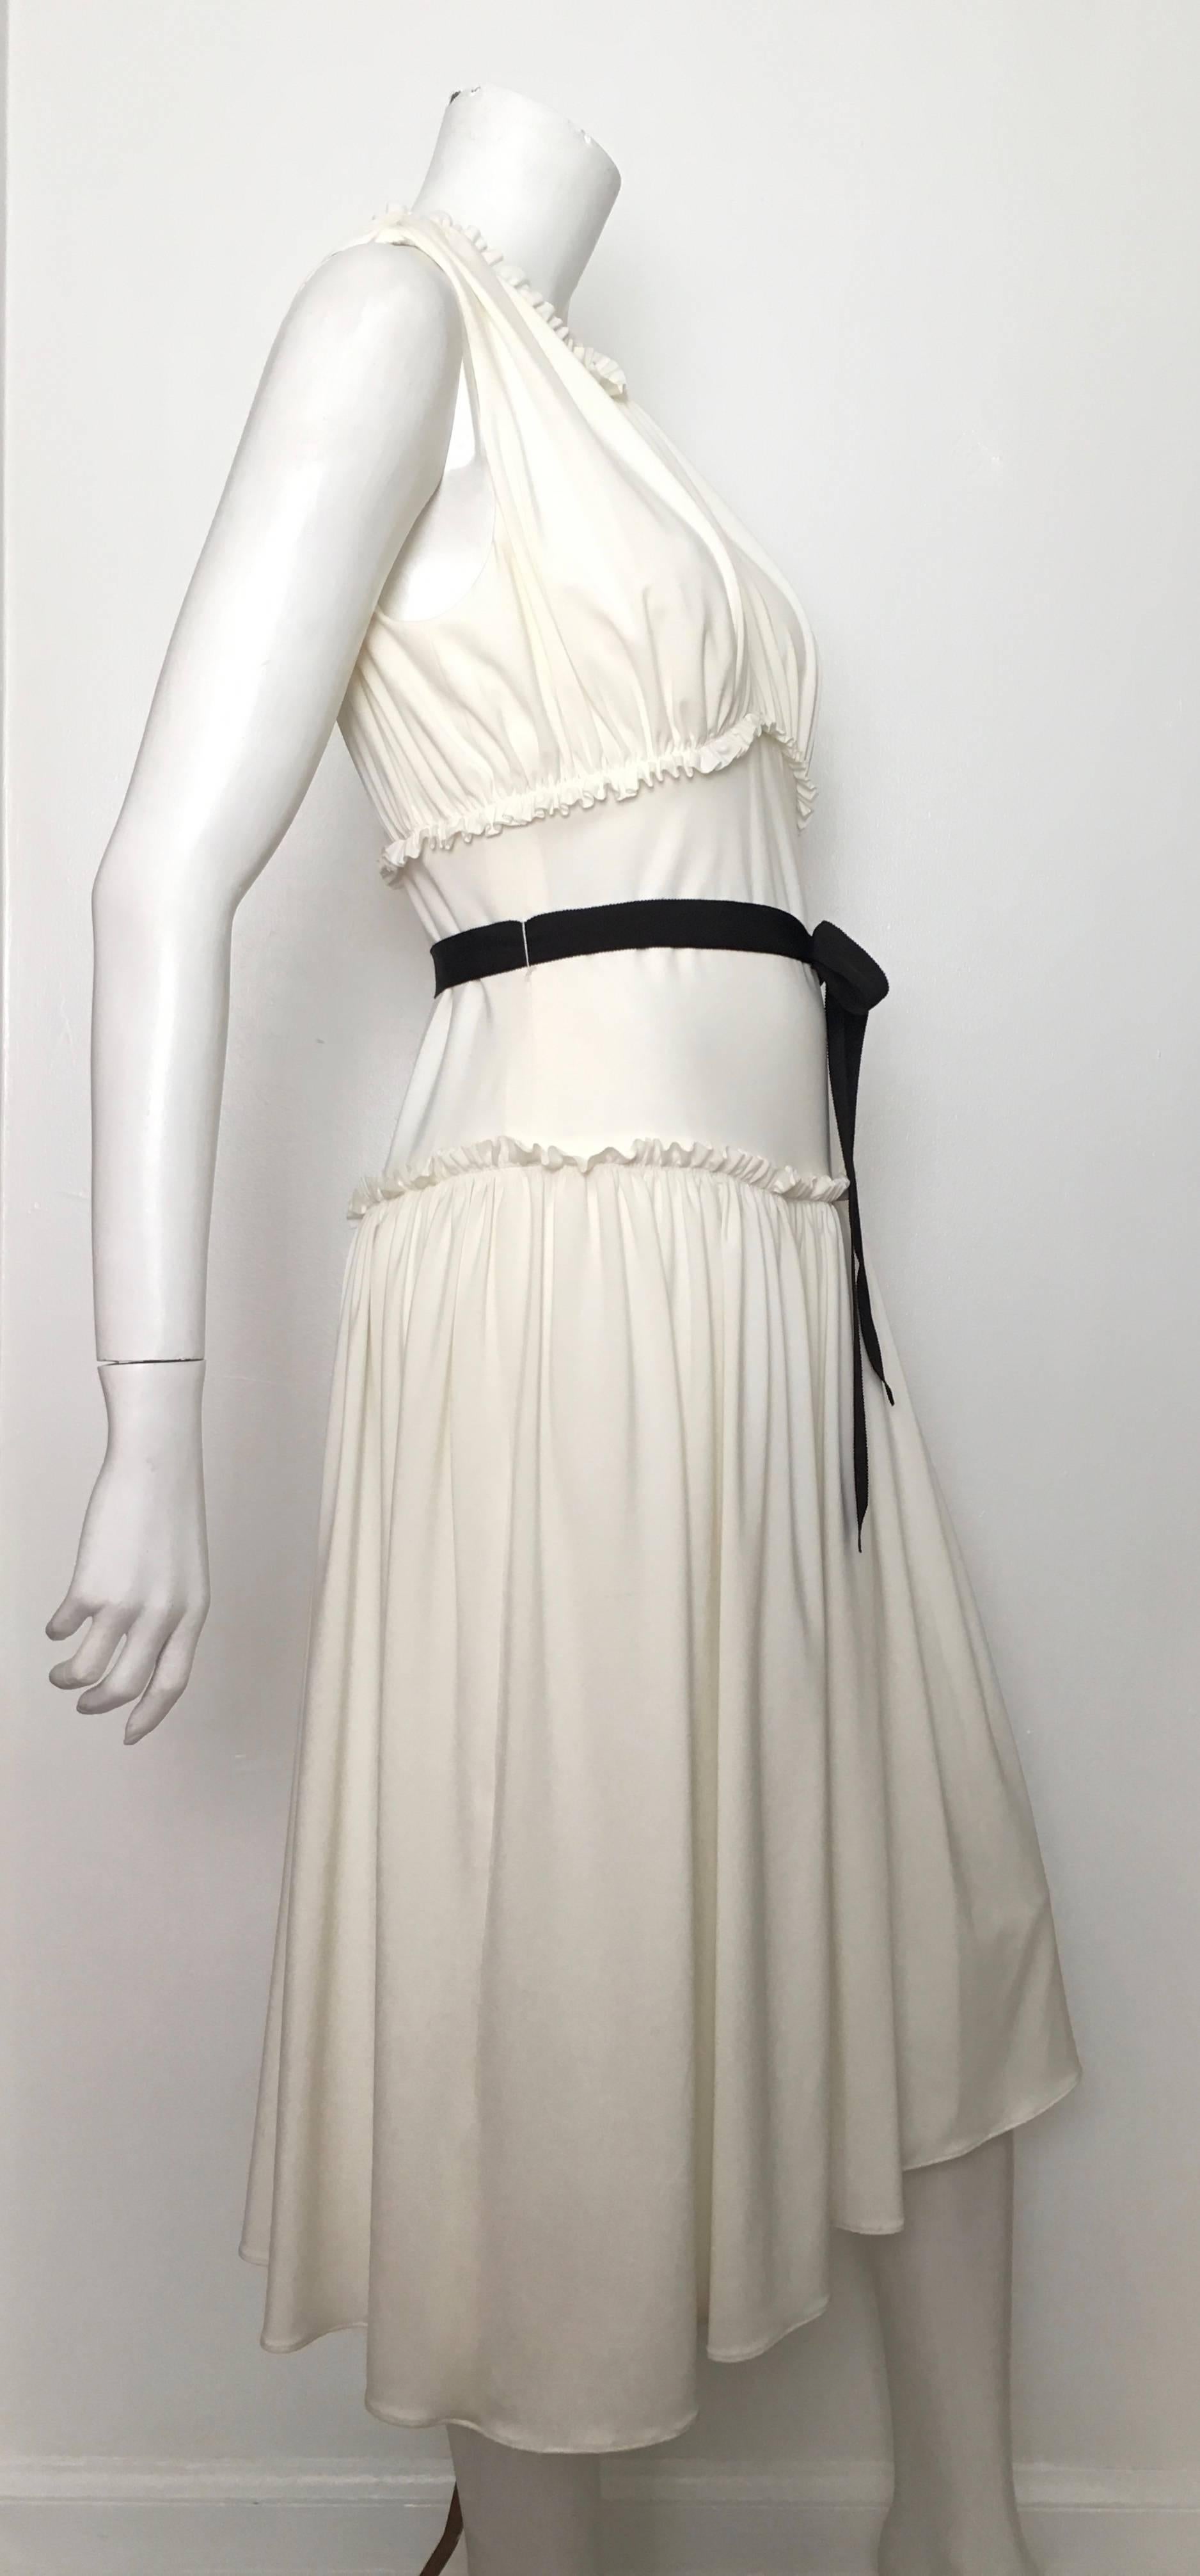 Vera Wang 1990s White Jersey Sleeveless Dress Size 8. In Excellent Condition For Sale In Atlanta, GA